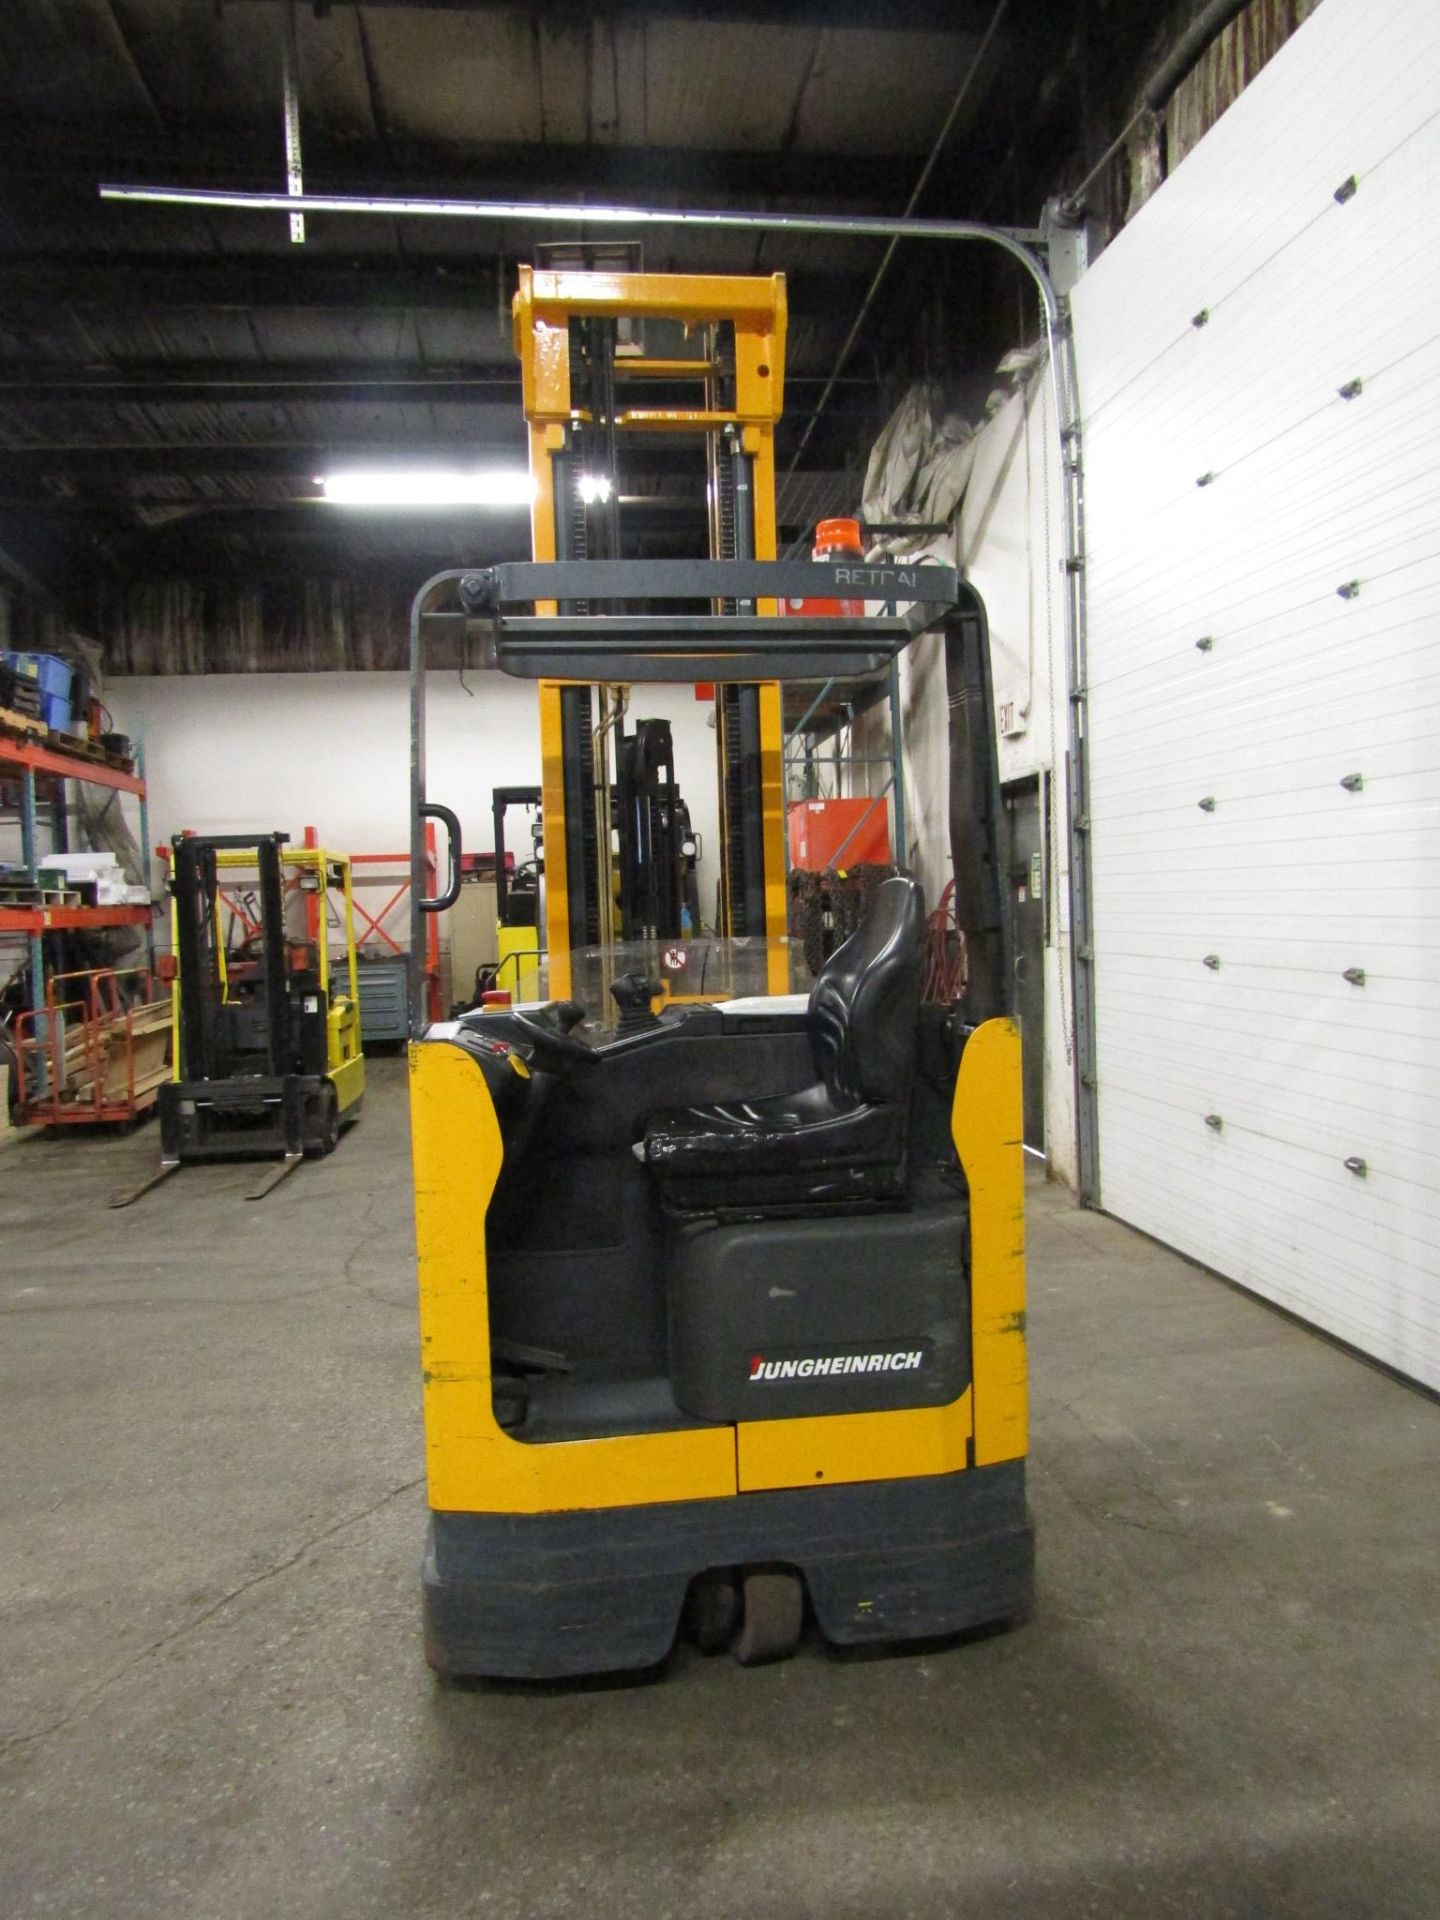 2012 Jungheinrich 3500lbs Capacity Electric Sit Down Reach Truck with 3-stage mast with sideshift - Image 3 of 3